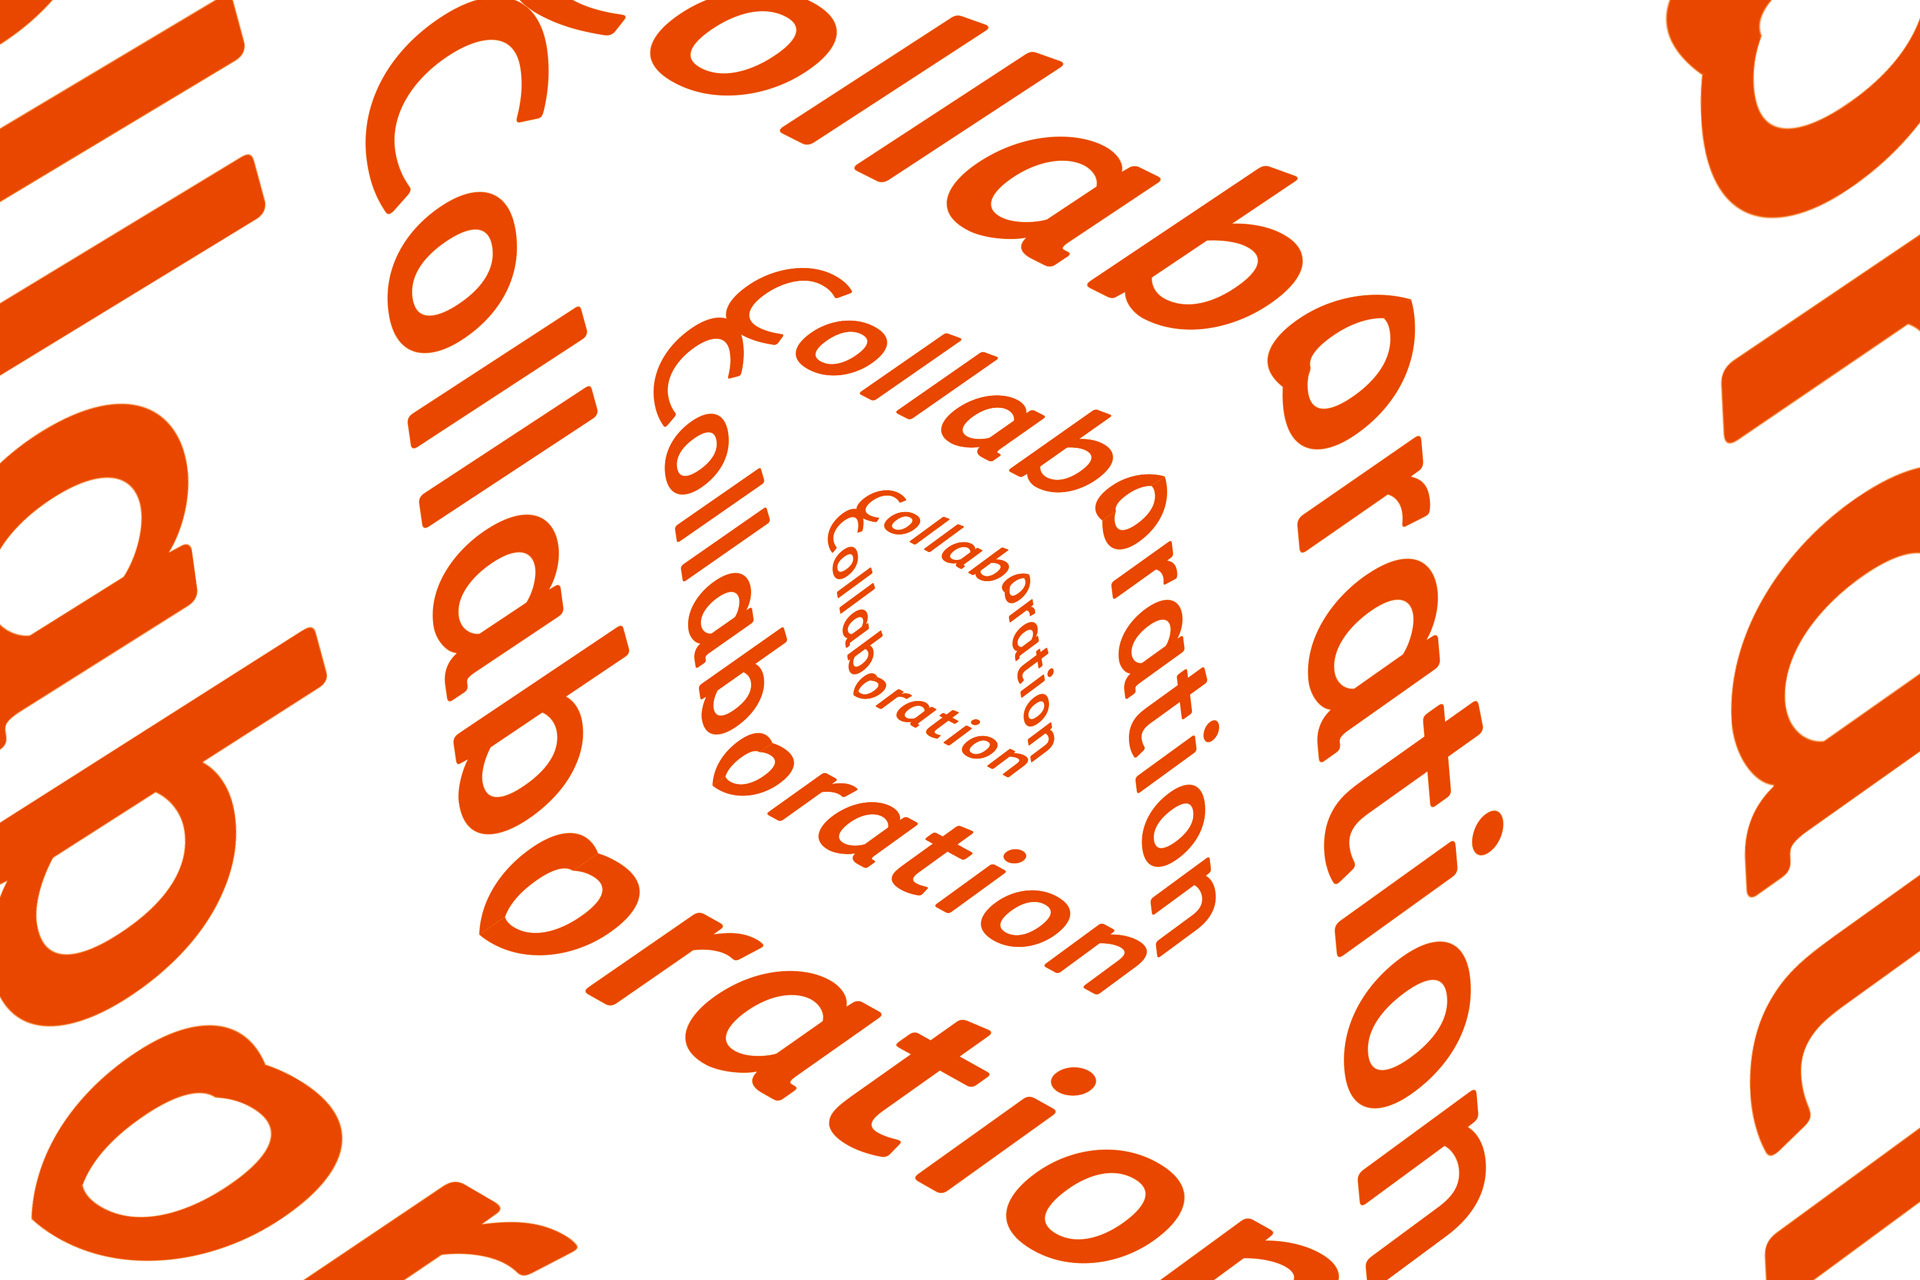 Diamond shaped graphic with the word 'Collaboration'